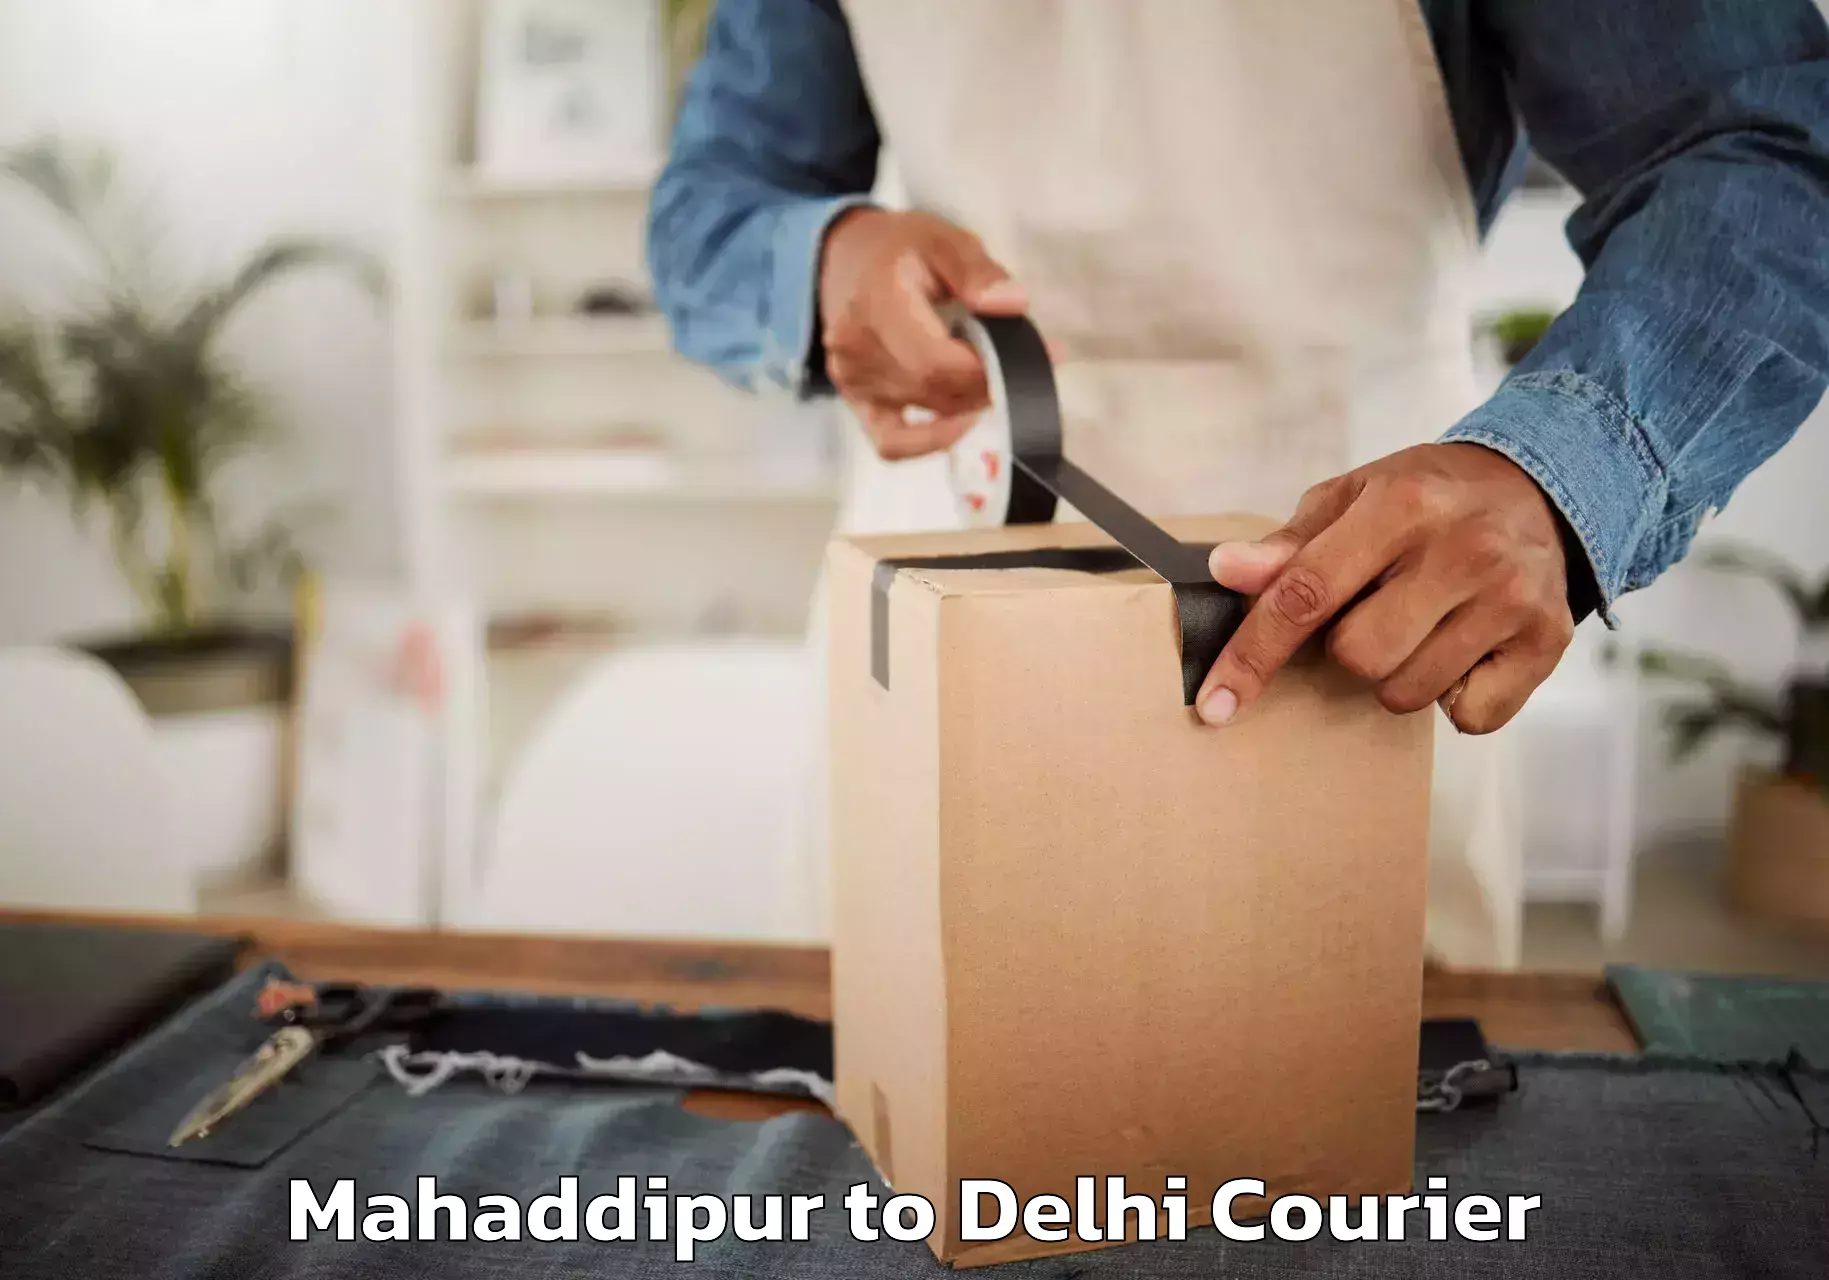 Furniture moving specialists Mahaddipur to Lodhi Road